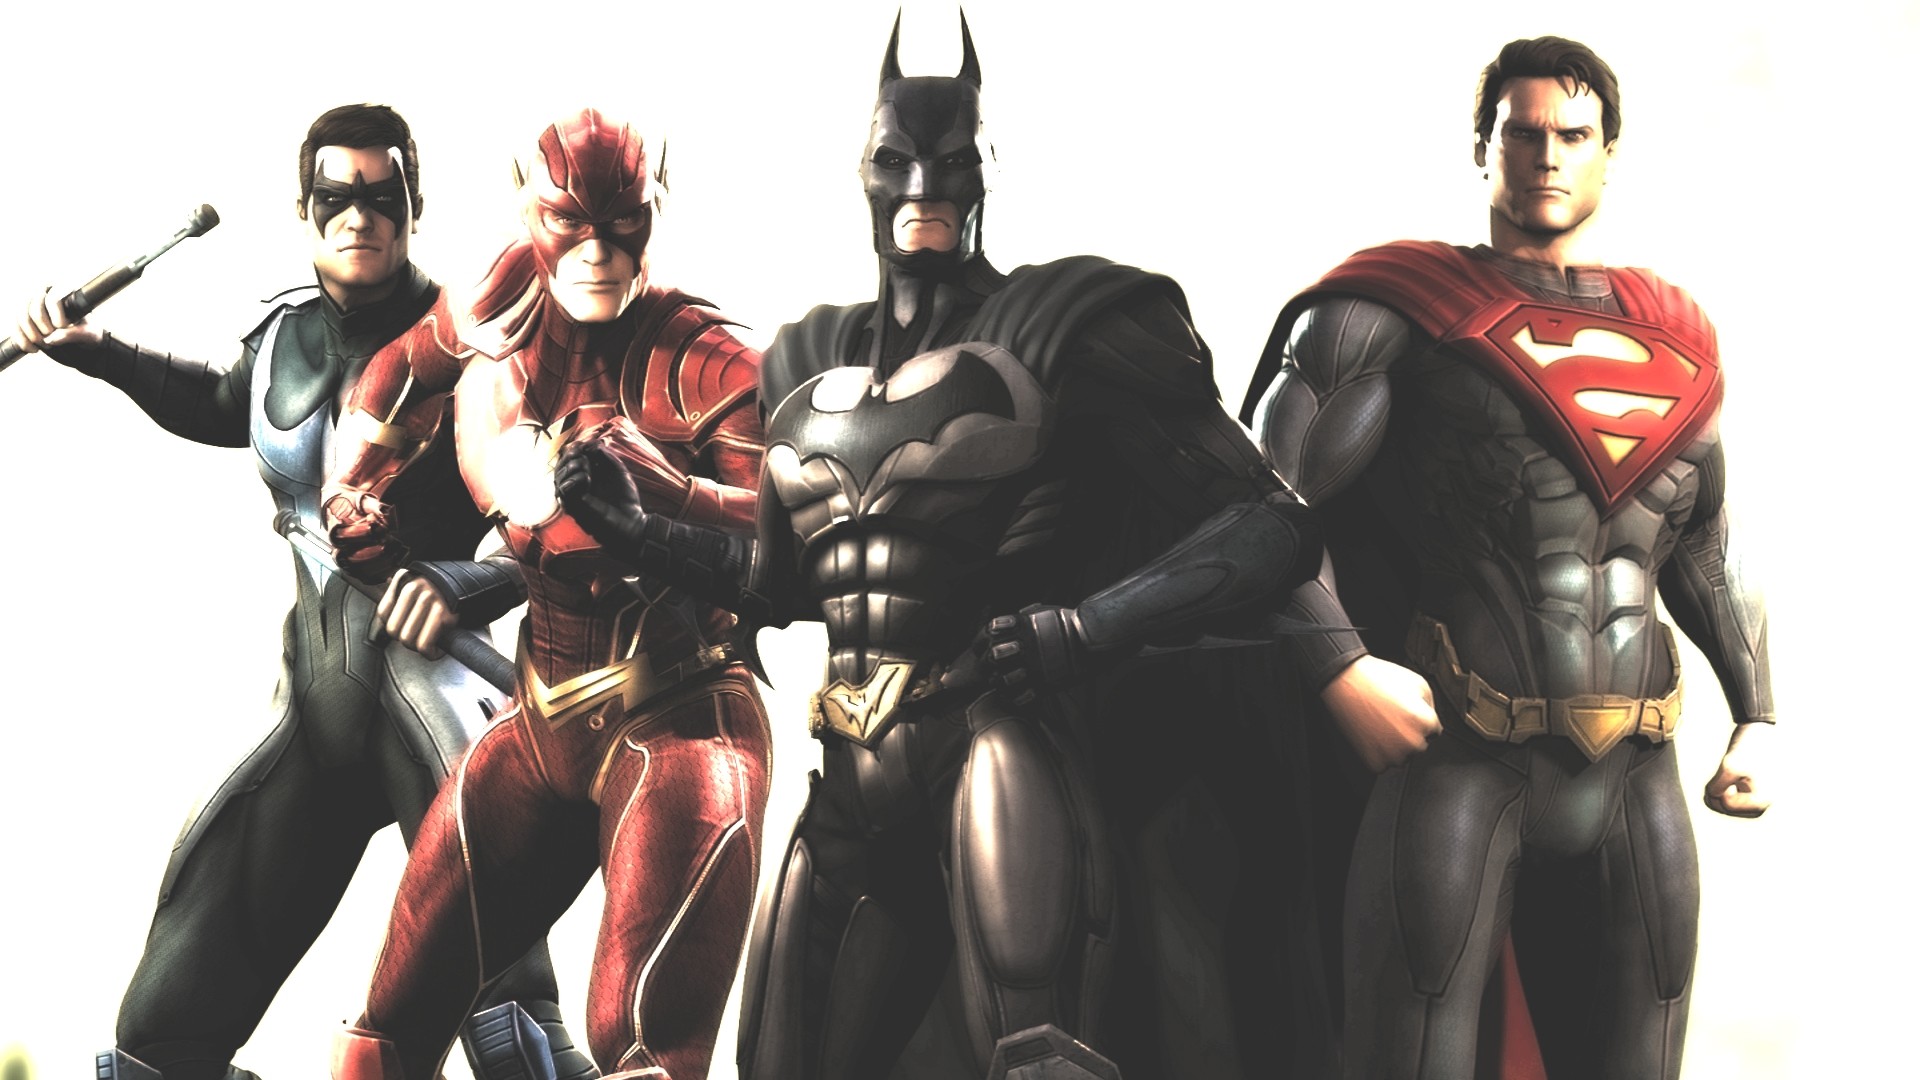 1920x1080 Injustice Gods Among Us Wallpaper by LadyLionhart Injustice Gods Among Us  Wallpaper by LadyLionhart